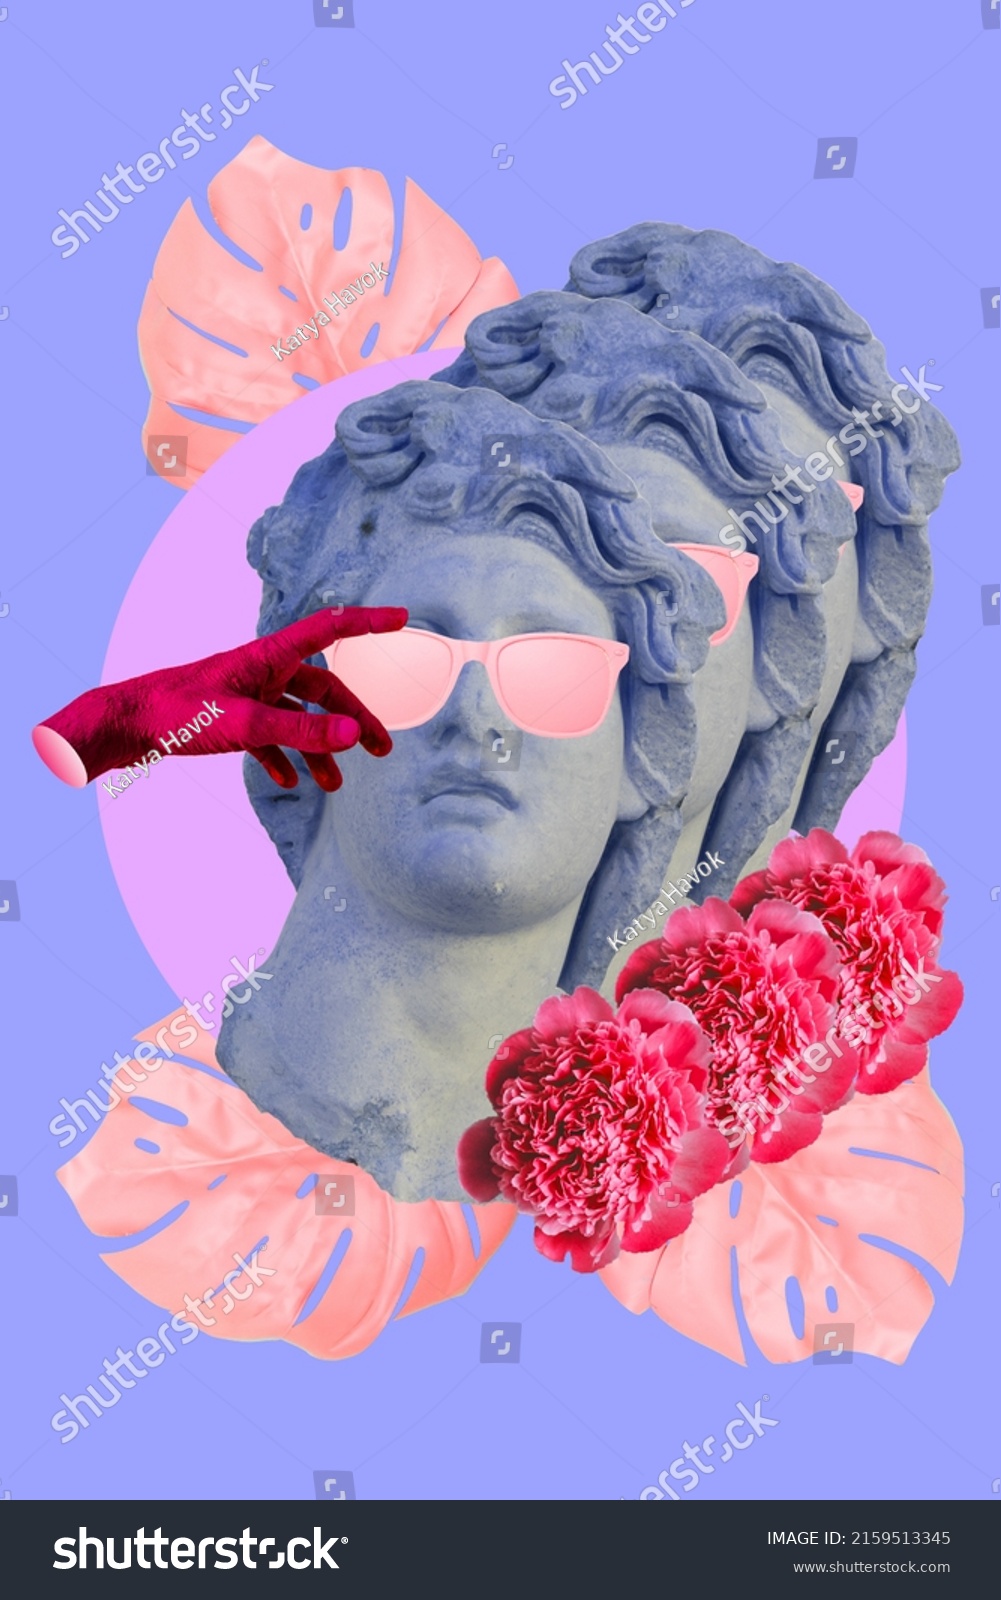 Collage art of classic statue with pink sunglasses, flowers and hand. Vaporwave style background. Sculpture in neon blue colors. #2159513345